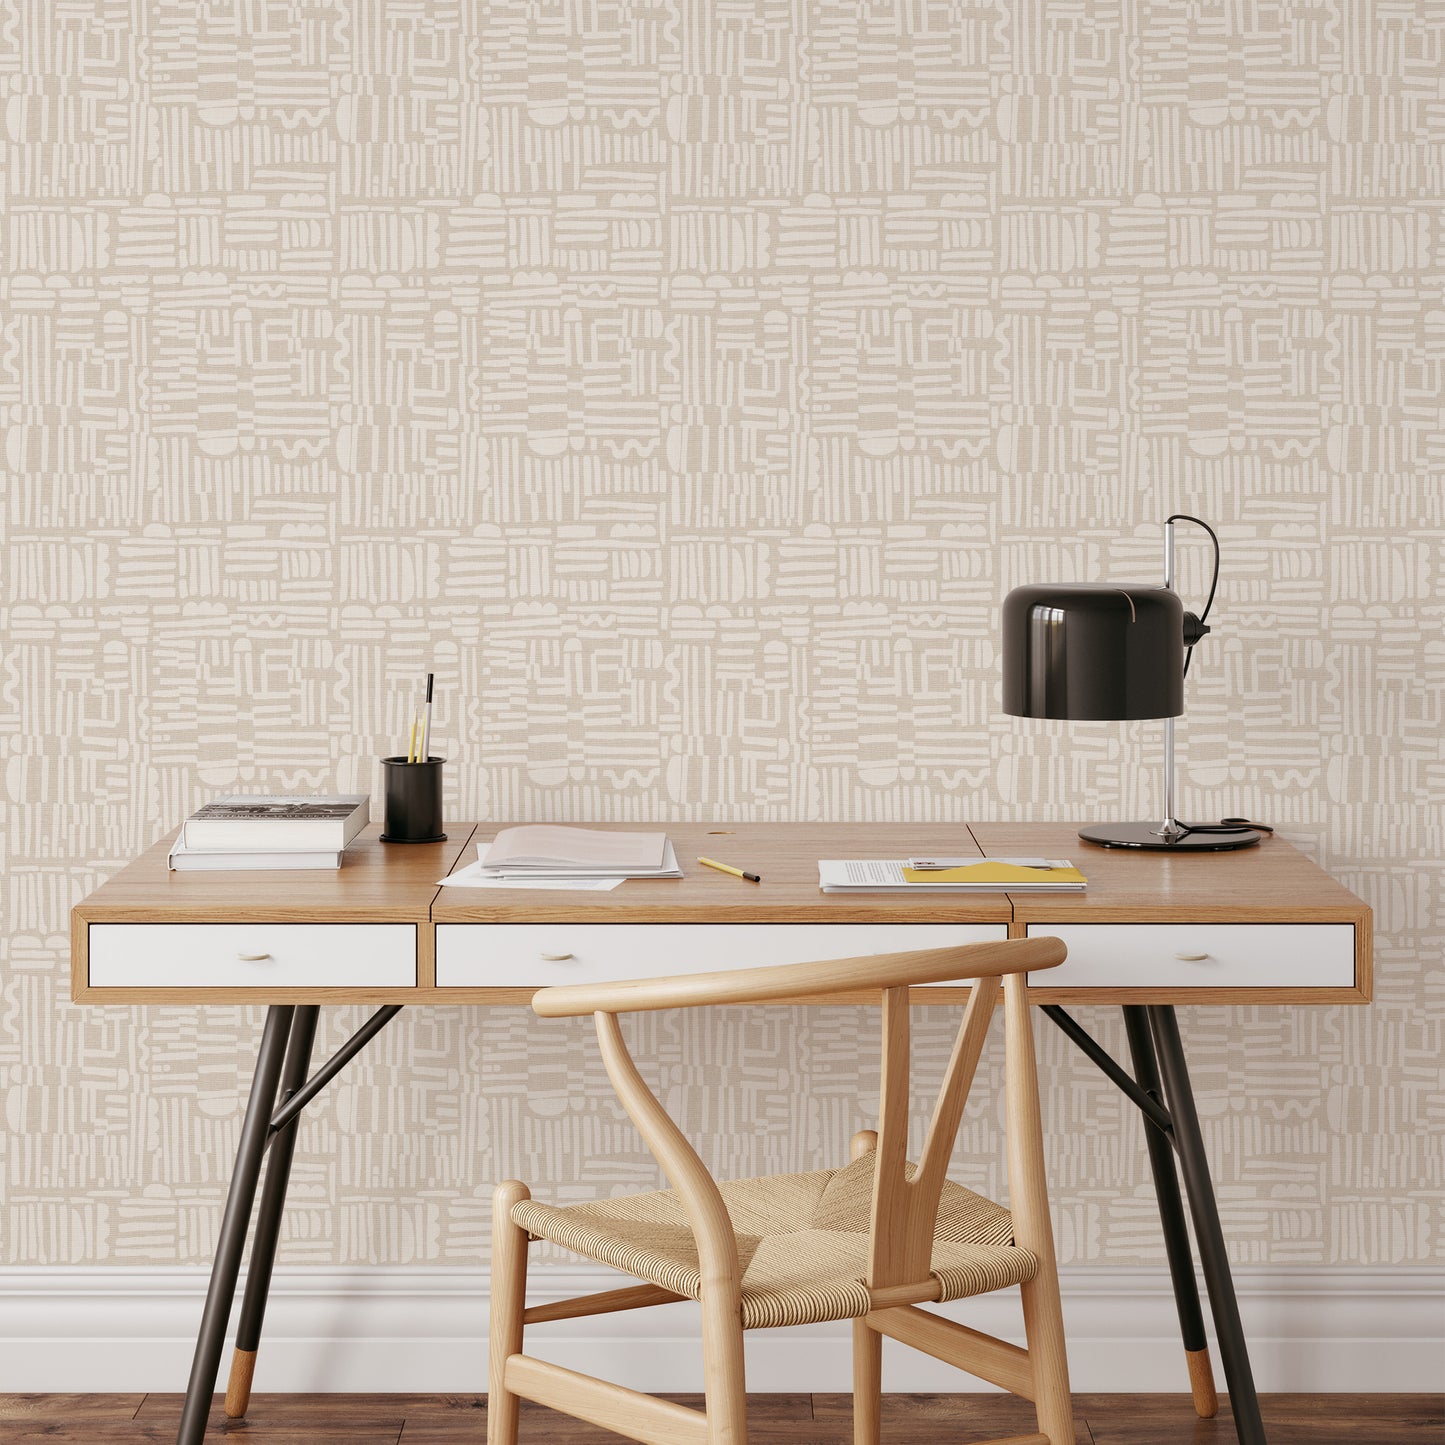 Introducing the statement wallpaper of your dreams, Geometric Lines Wallpaper - Bone. Feel the avant-garde artistry of this exclusive design as its funky lines add a delightful flair to your walls. 